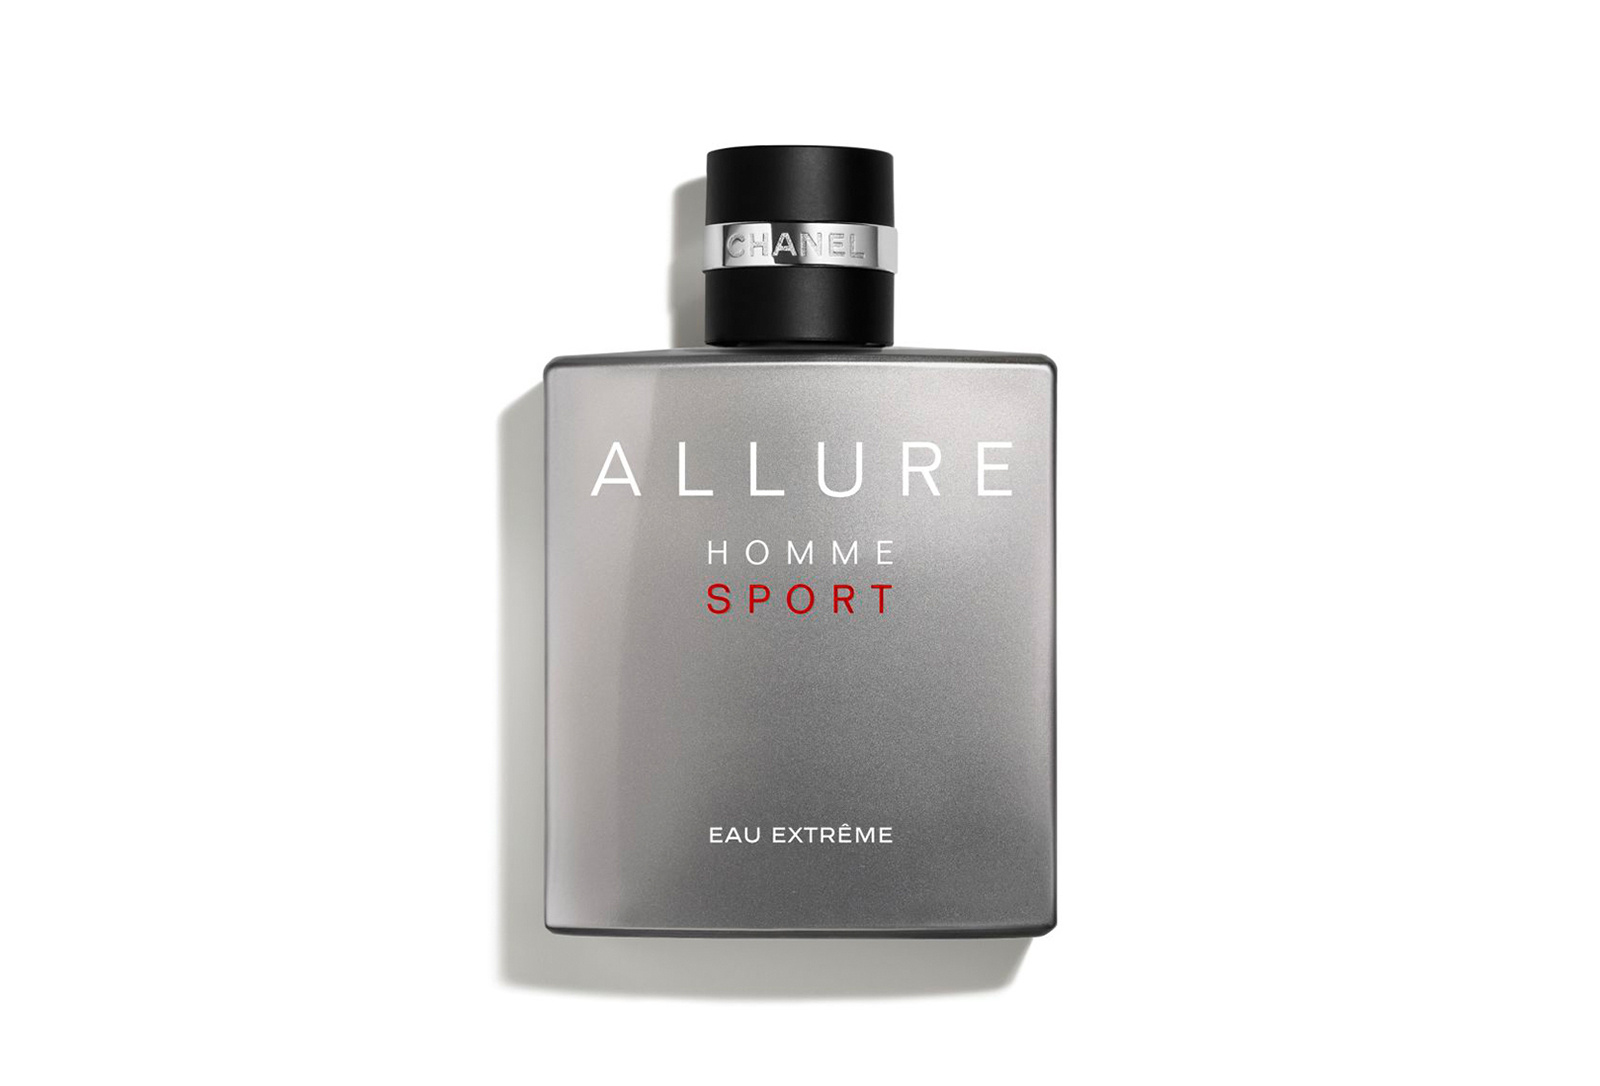 Вода парфюмерная Chanel Allure Homme Sport Eau Extreme мужская, 50 мл chanel catwalk the complete collections